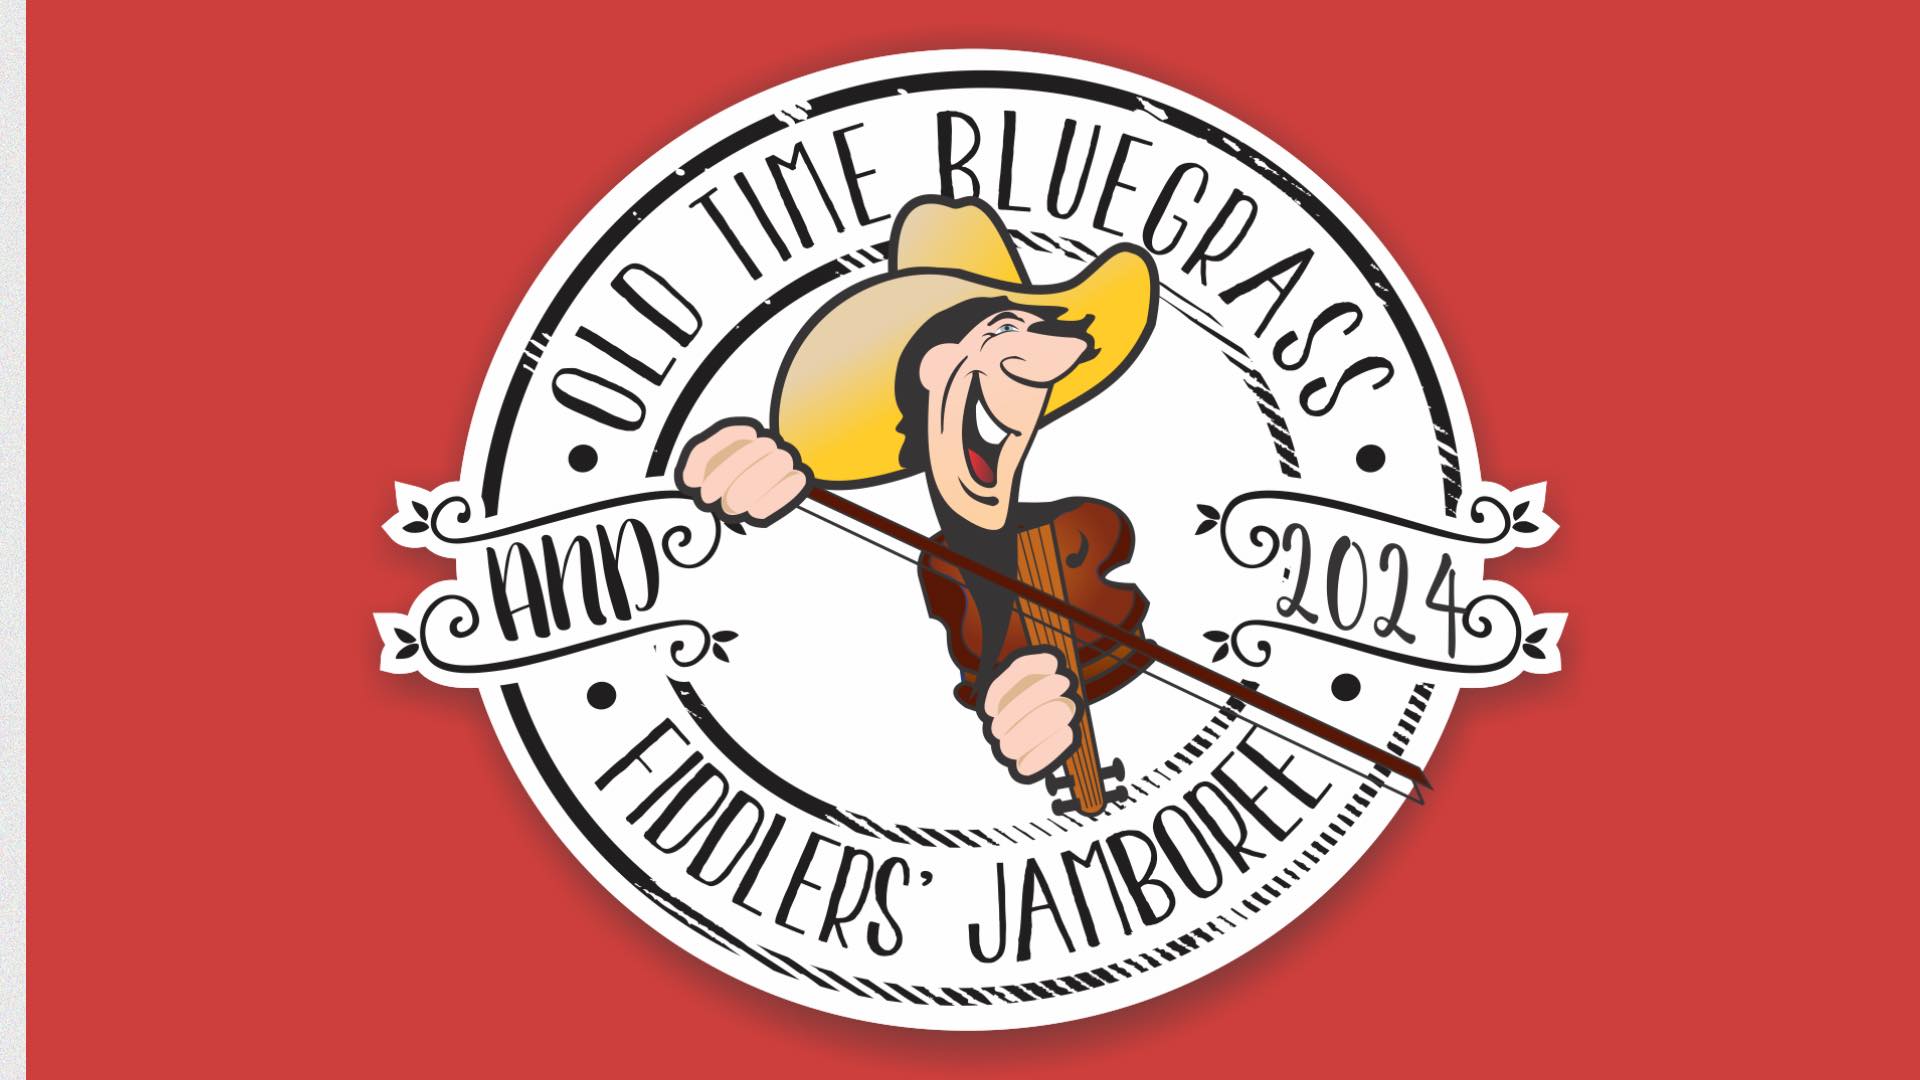 66th Annual Old Time Bluegrass and Fiddlers' Jamboree